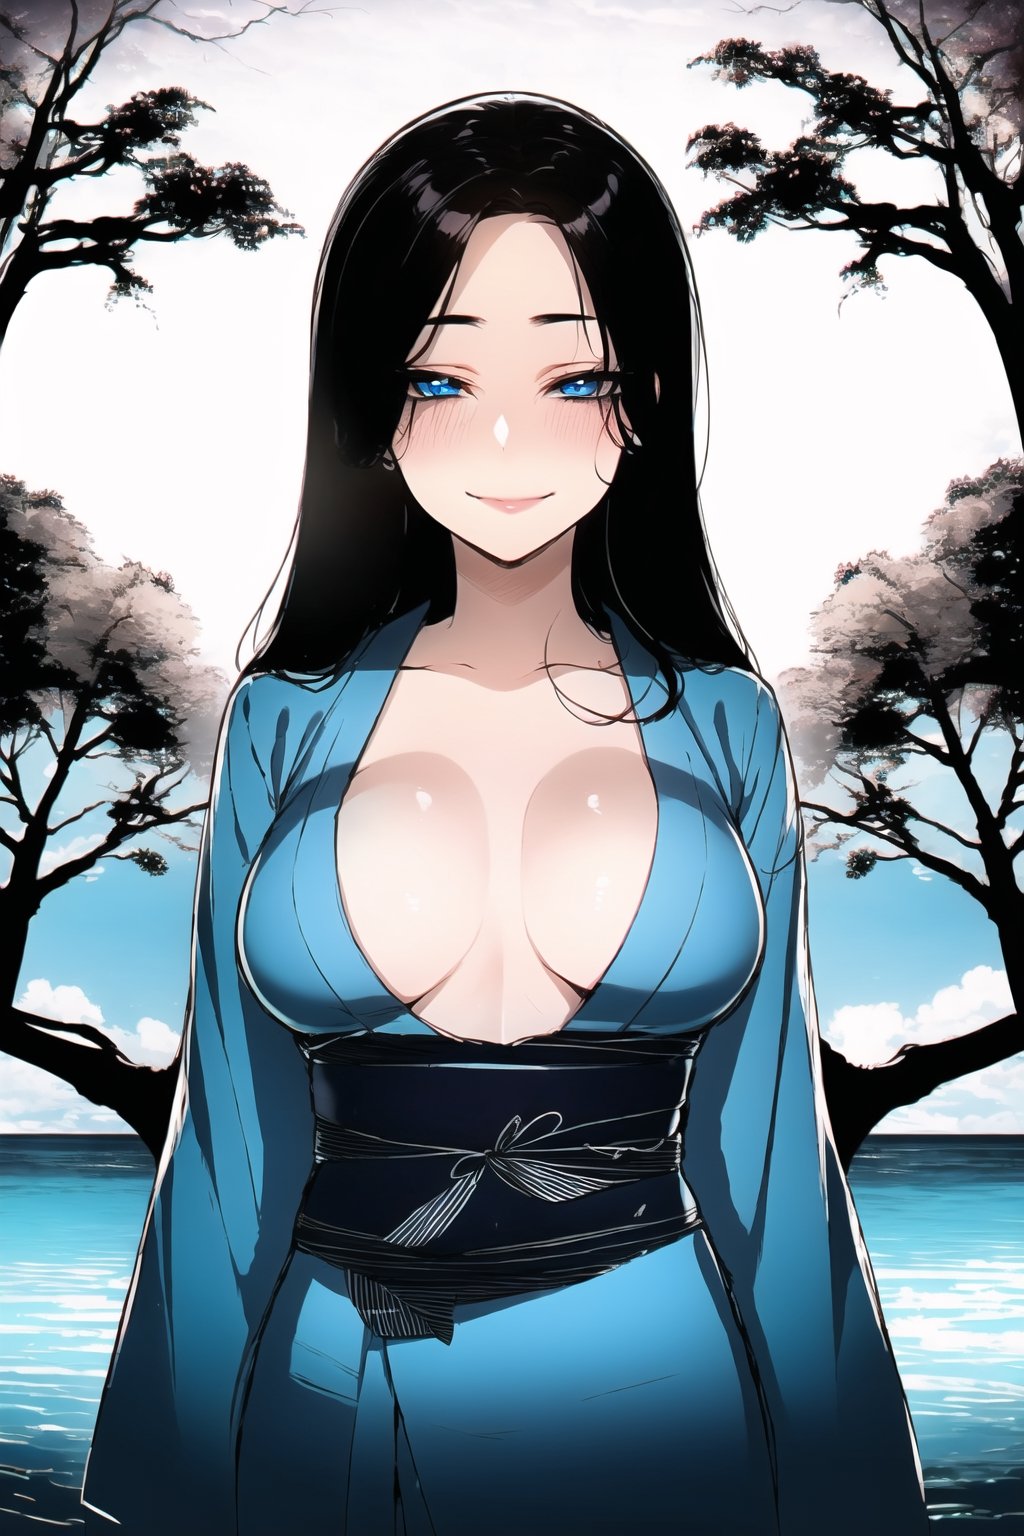 1girl(skinny body, young, 20 years old, long black hair, blue eyes, wearing yukata, small breasts), staring at you seductively with a smile on her face, upper body, background(day, outdoor, sky, sun, ocean, flowers, trees) (masterpiece, highres, high quality:1.2), ambient occlusion, outstanding colors, low saturation,High detailed, Detailedface, Dreamscape,ratatatat74 style